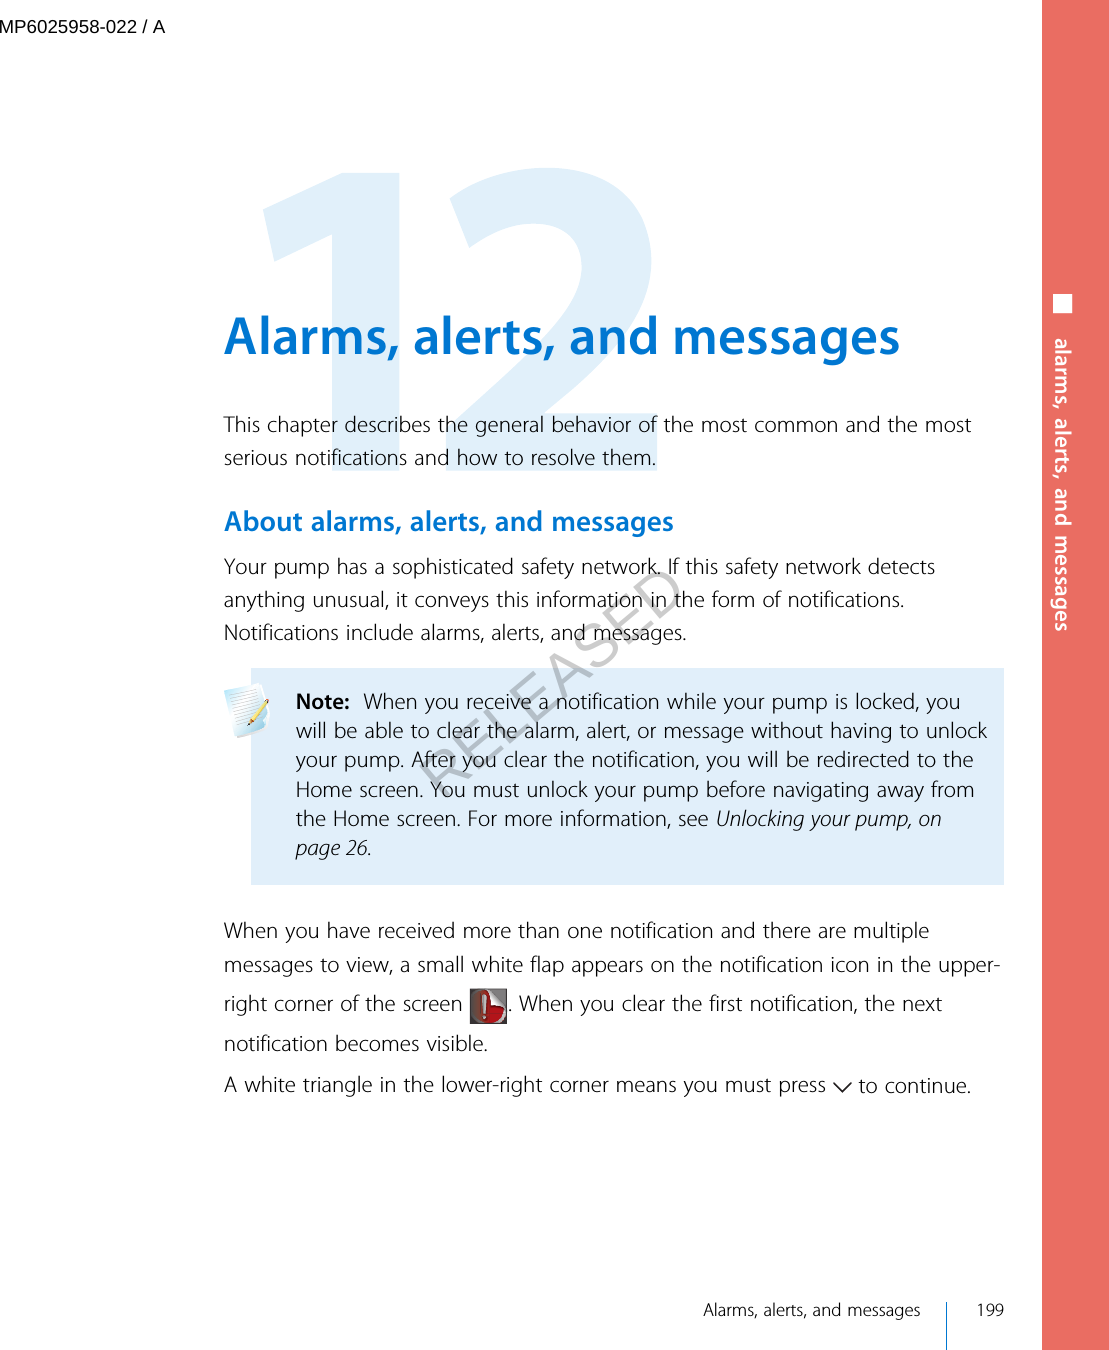  Alarms, alerts, and messagesThis chapter describes the general behavior of the most common and the mostserious notifications and how to resolve them.About alarms, alerts, and messagesYour pump has a sophisticated safety network. If this safety network detectsanything unusual, it conveys this information in the form of notifications.Notifications include alarms, alerts, and messages.Note:  When you receive a notification while your pump is locked, youwill be able to clear the alarm, alert, or message without having to unlockyour pump. After you clear the notification, you will be redirected to theHome screen. You must unlock your pump before navigating away fromthe Home screen. For more information, see Unlocking your pump, onpage 26. When you have received more than one notification and there are multiplemessages to view, a small white flap appears on the notification icon in the upper-right corner of the screen  . When you clear the first notification, the nextnotification becomes visible.A white triangle in the lower-right corner means you must press   to continue. Alarms, alerts, and messages 199■ alarms, alerts, and messagesMP6025958-022 / ARELEASED